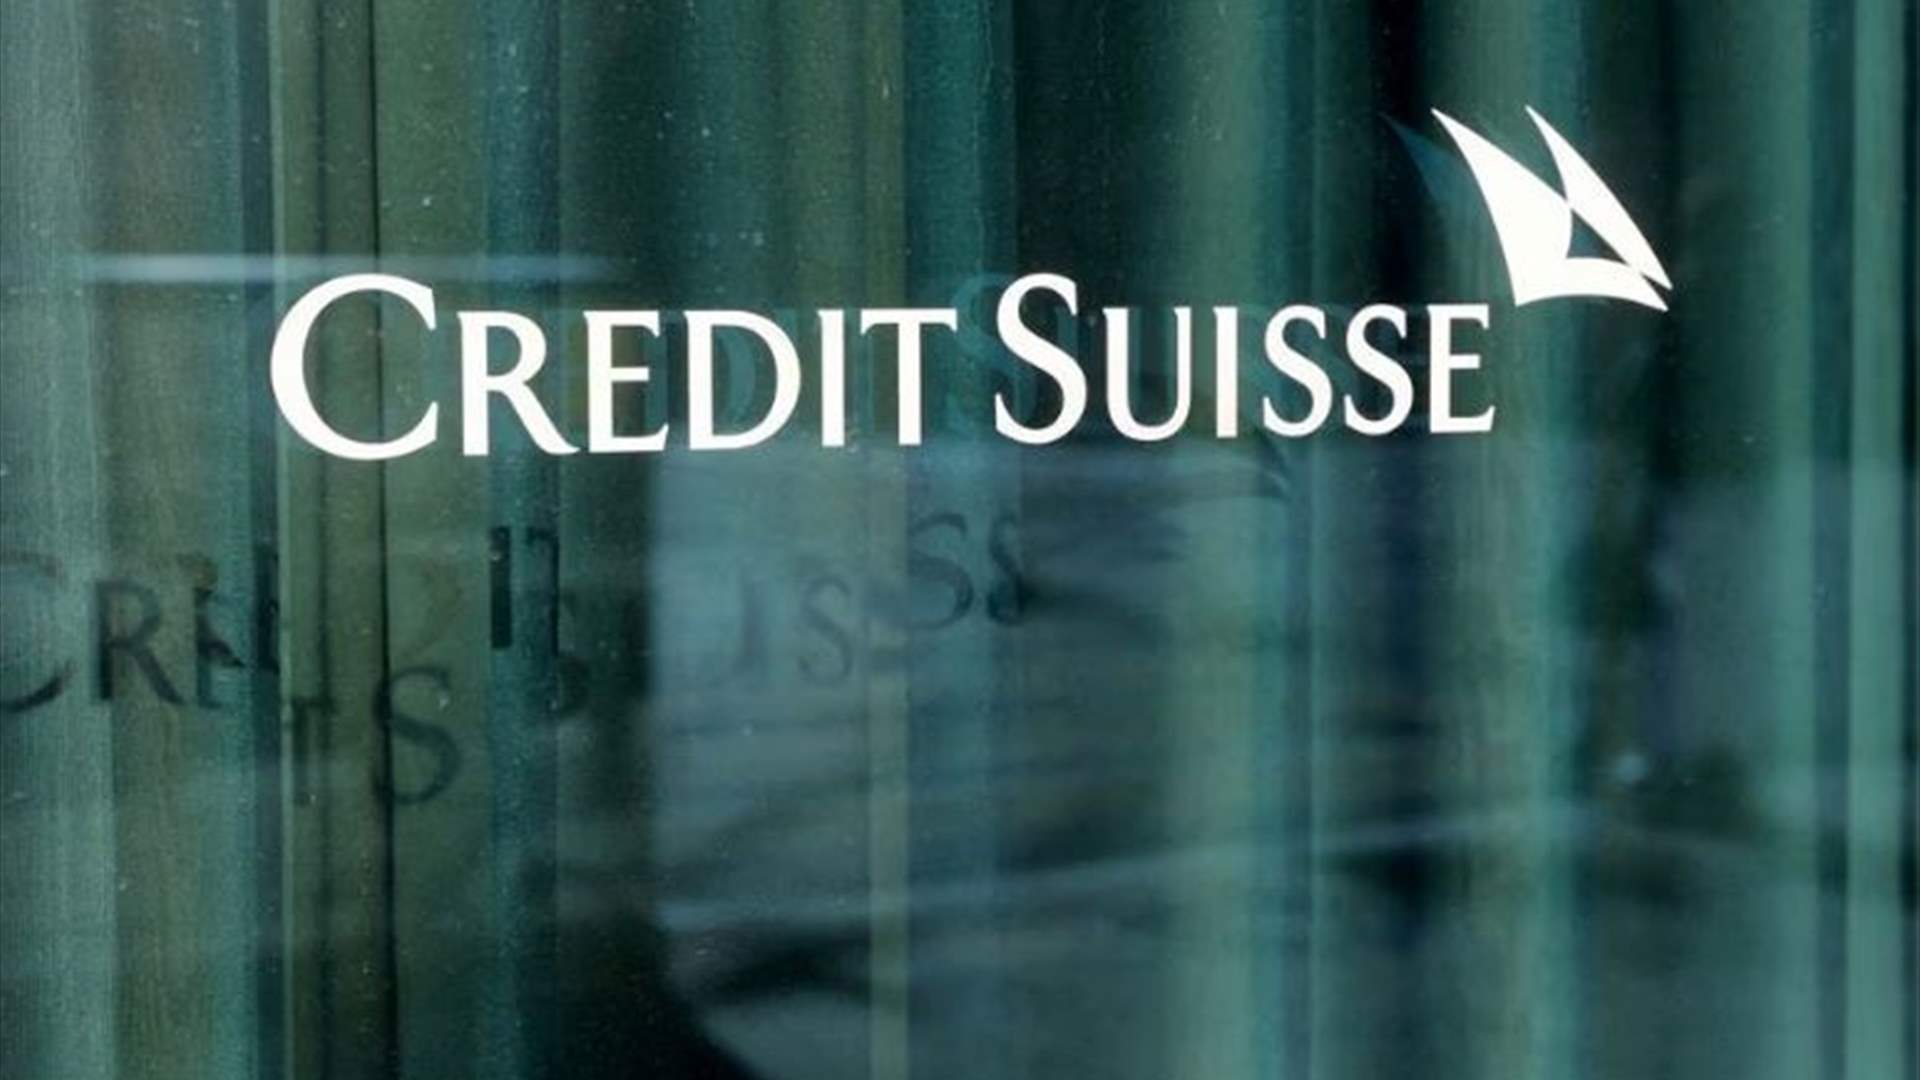 Georgian billionaire wins $926 mln from Credit Suisse after fraud